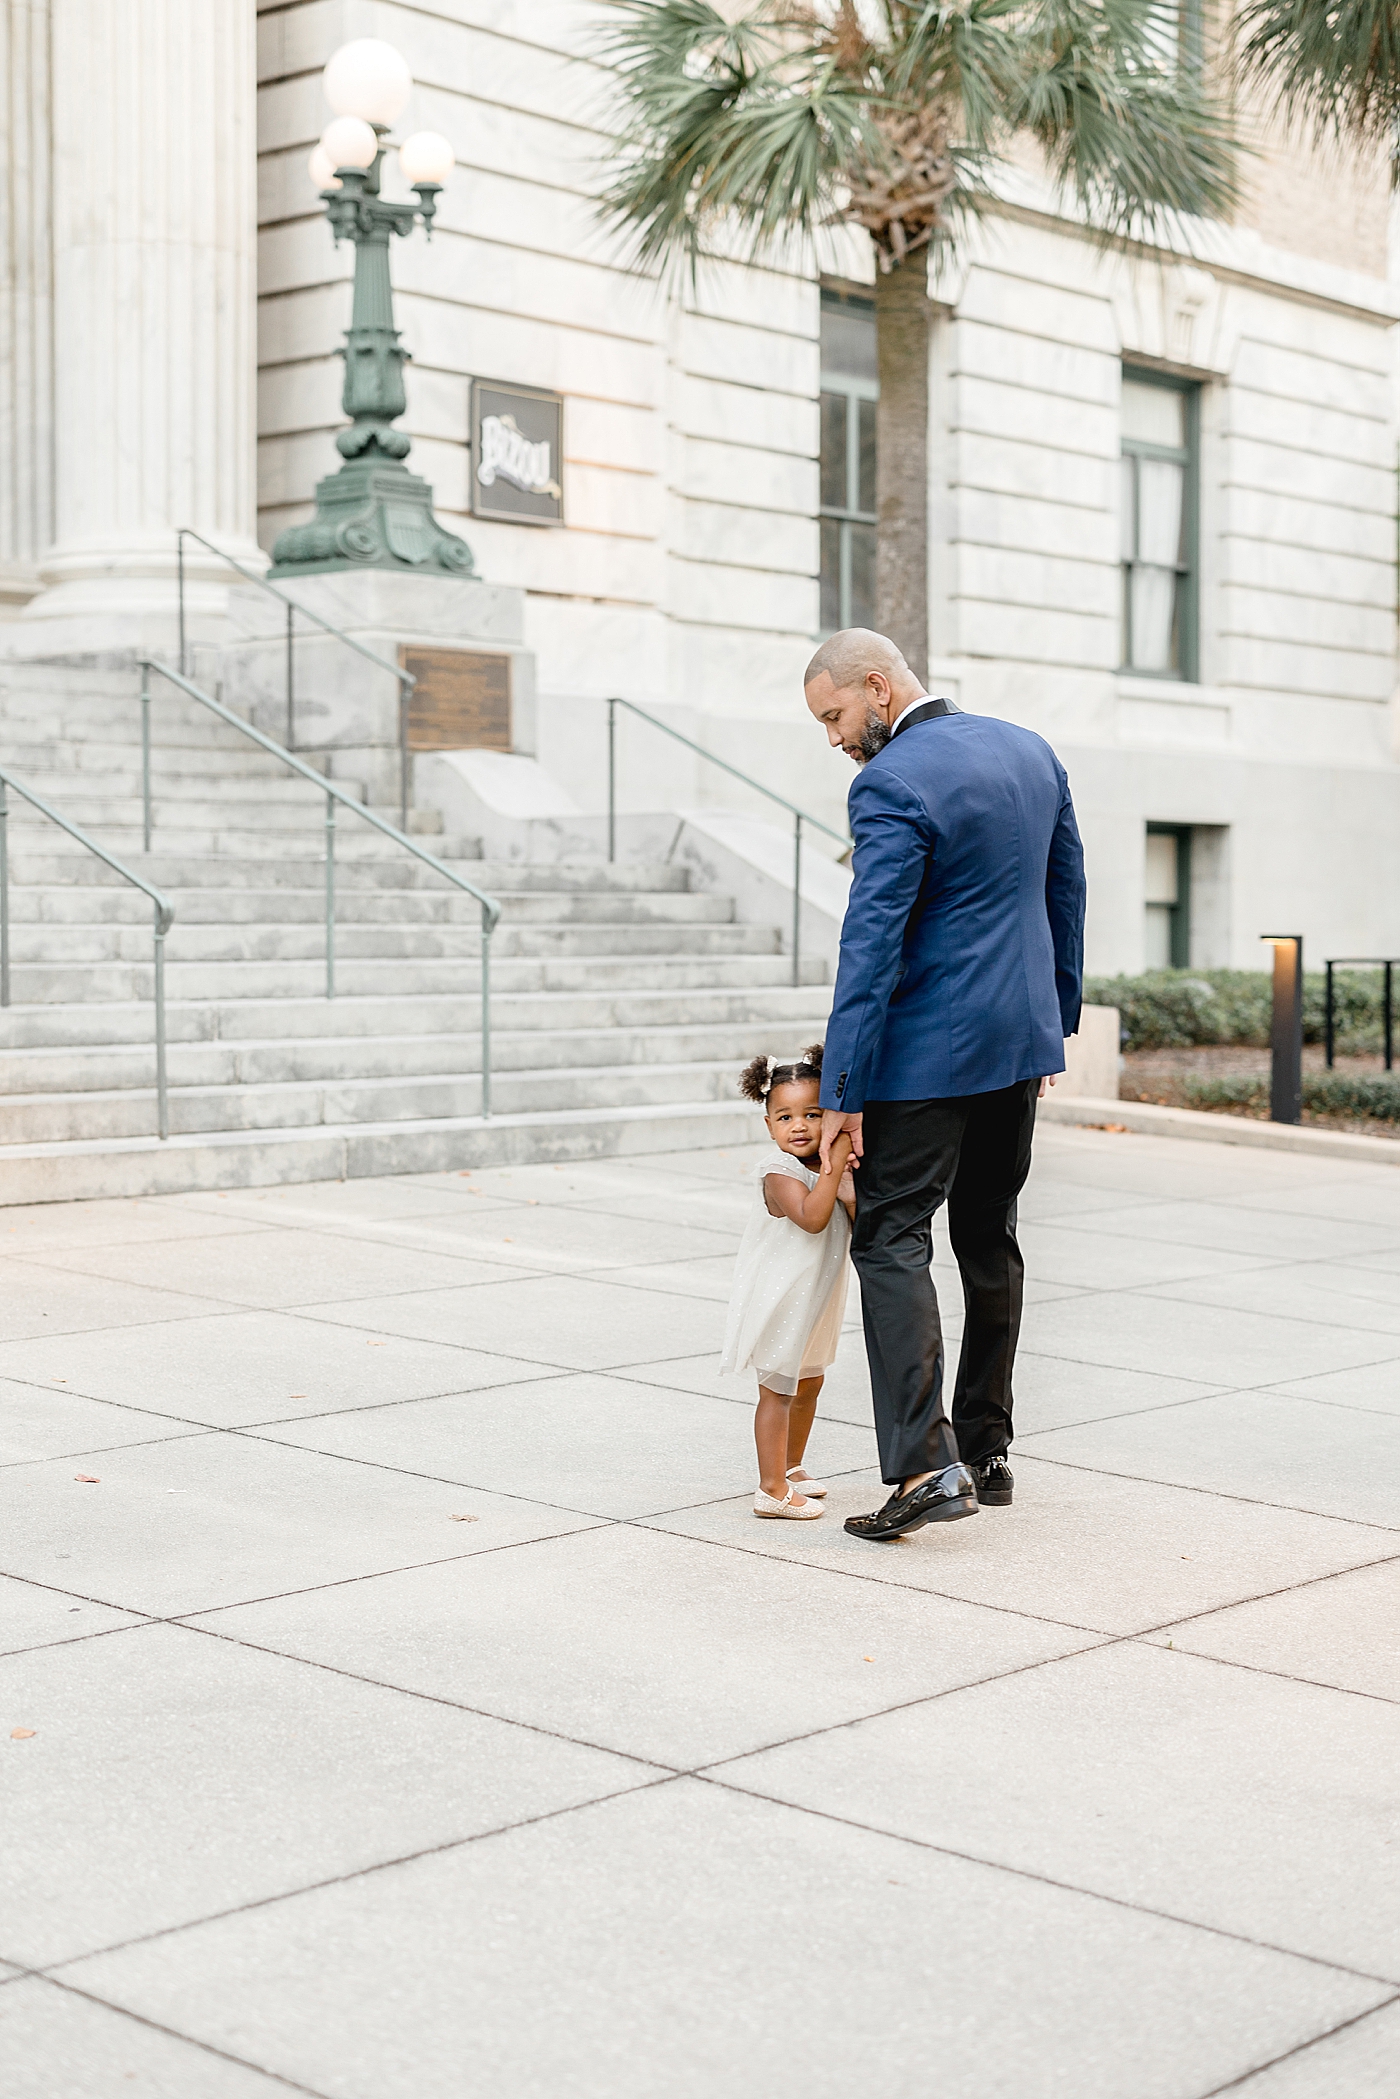 Two year old little girl holding her Dad's hands walking. Photos by Brittany Elise Photography.